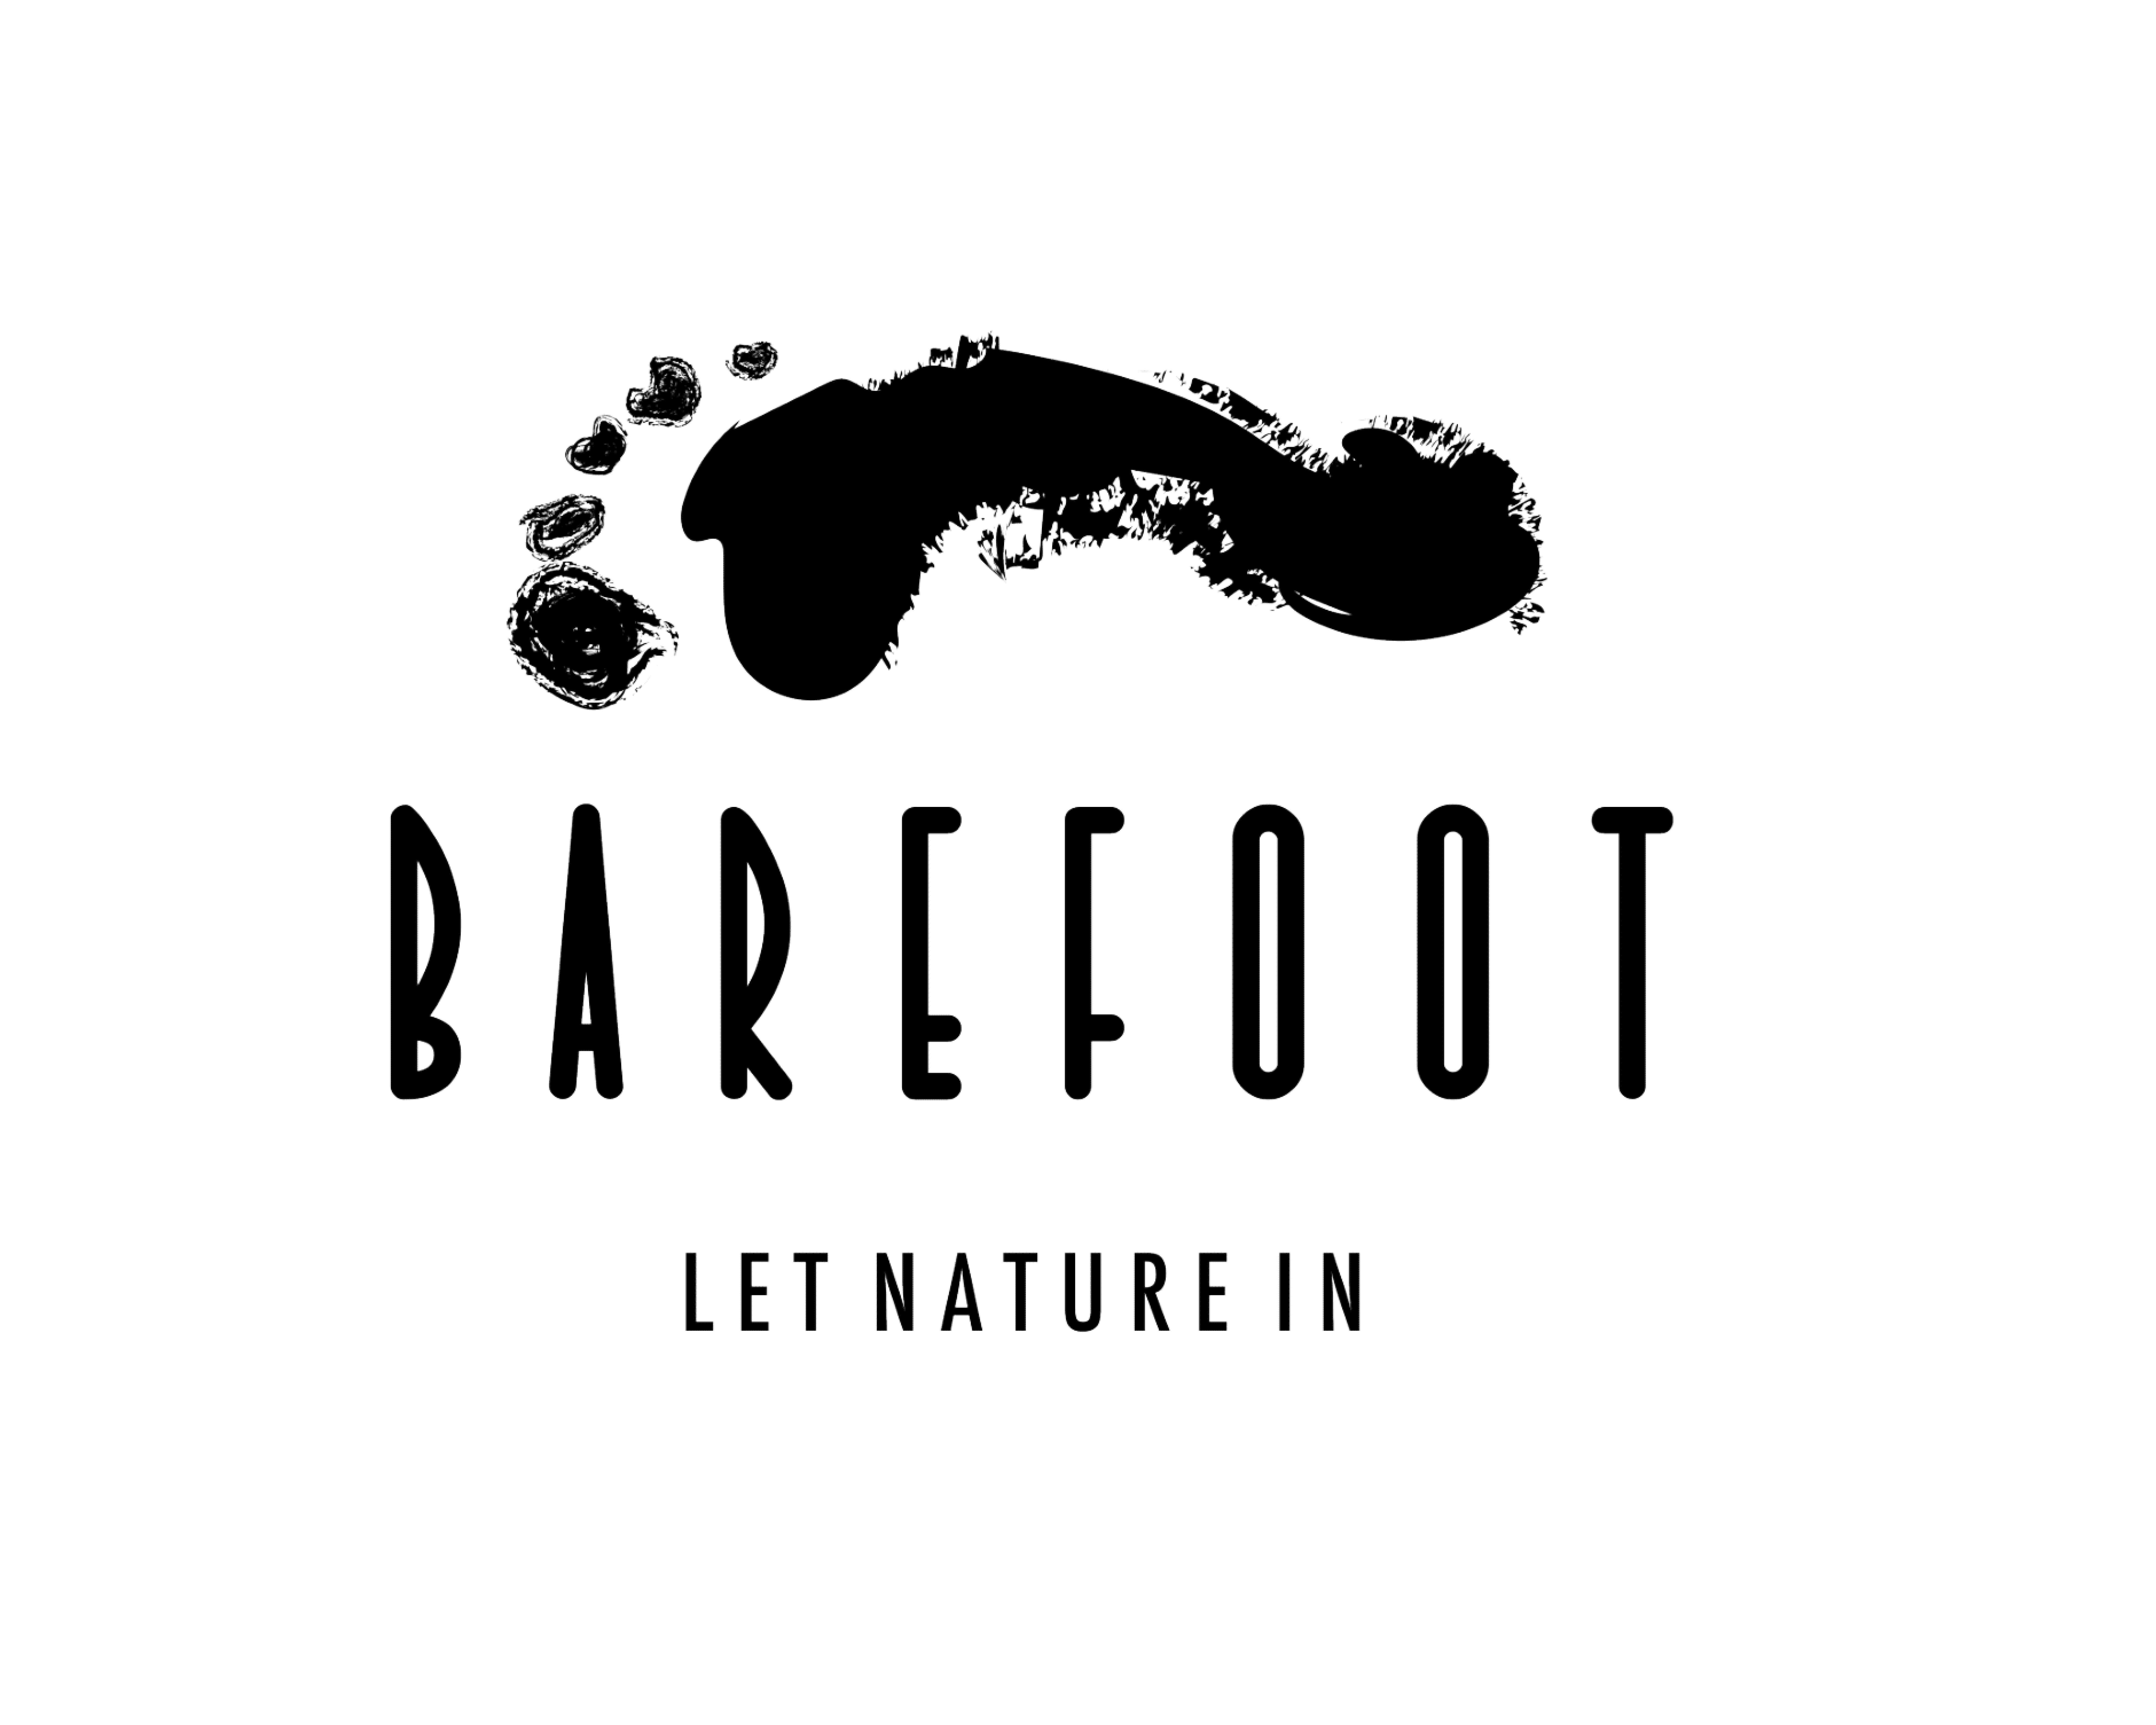 Barefoot Experience